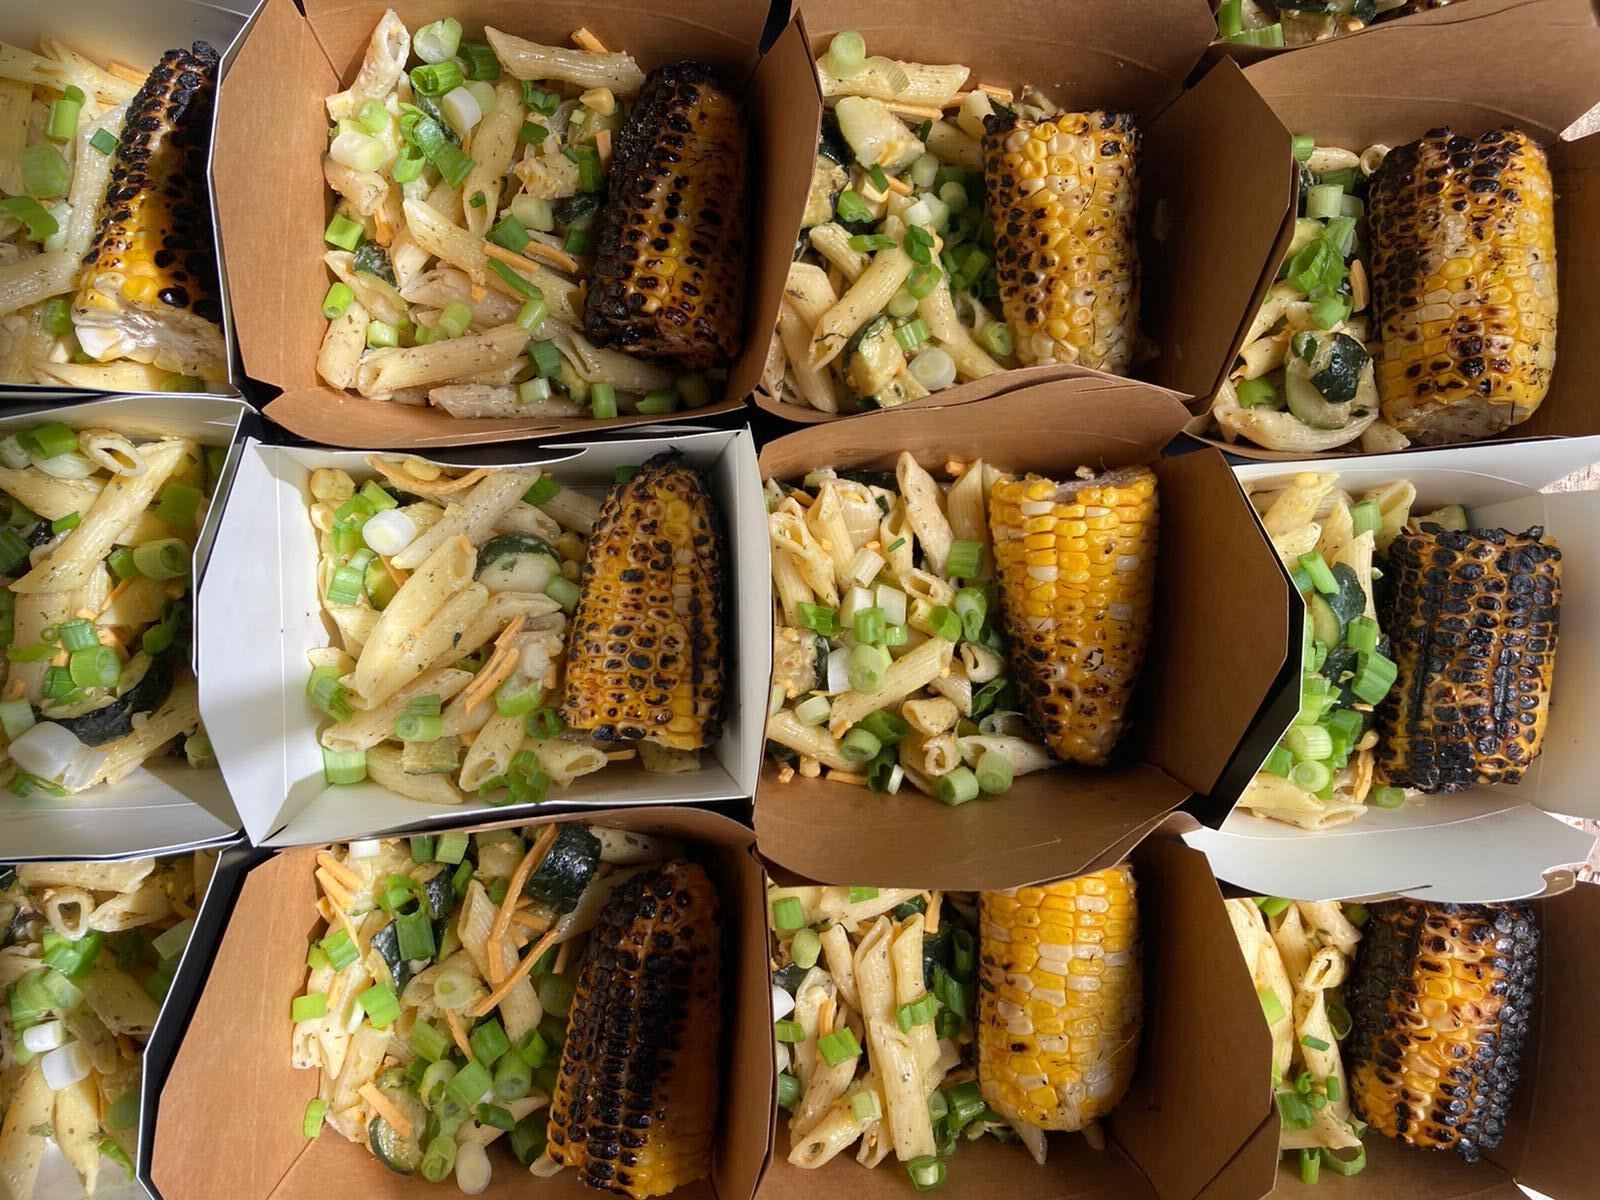 Various takeout containers full of pastas and corn.